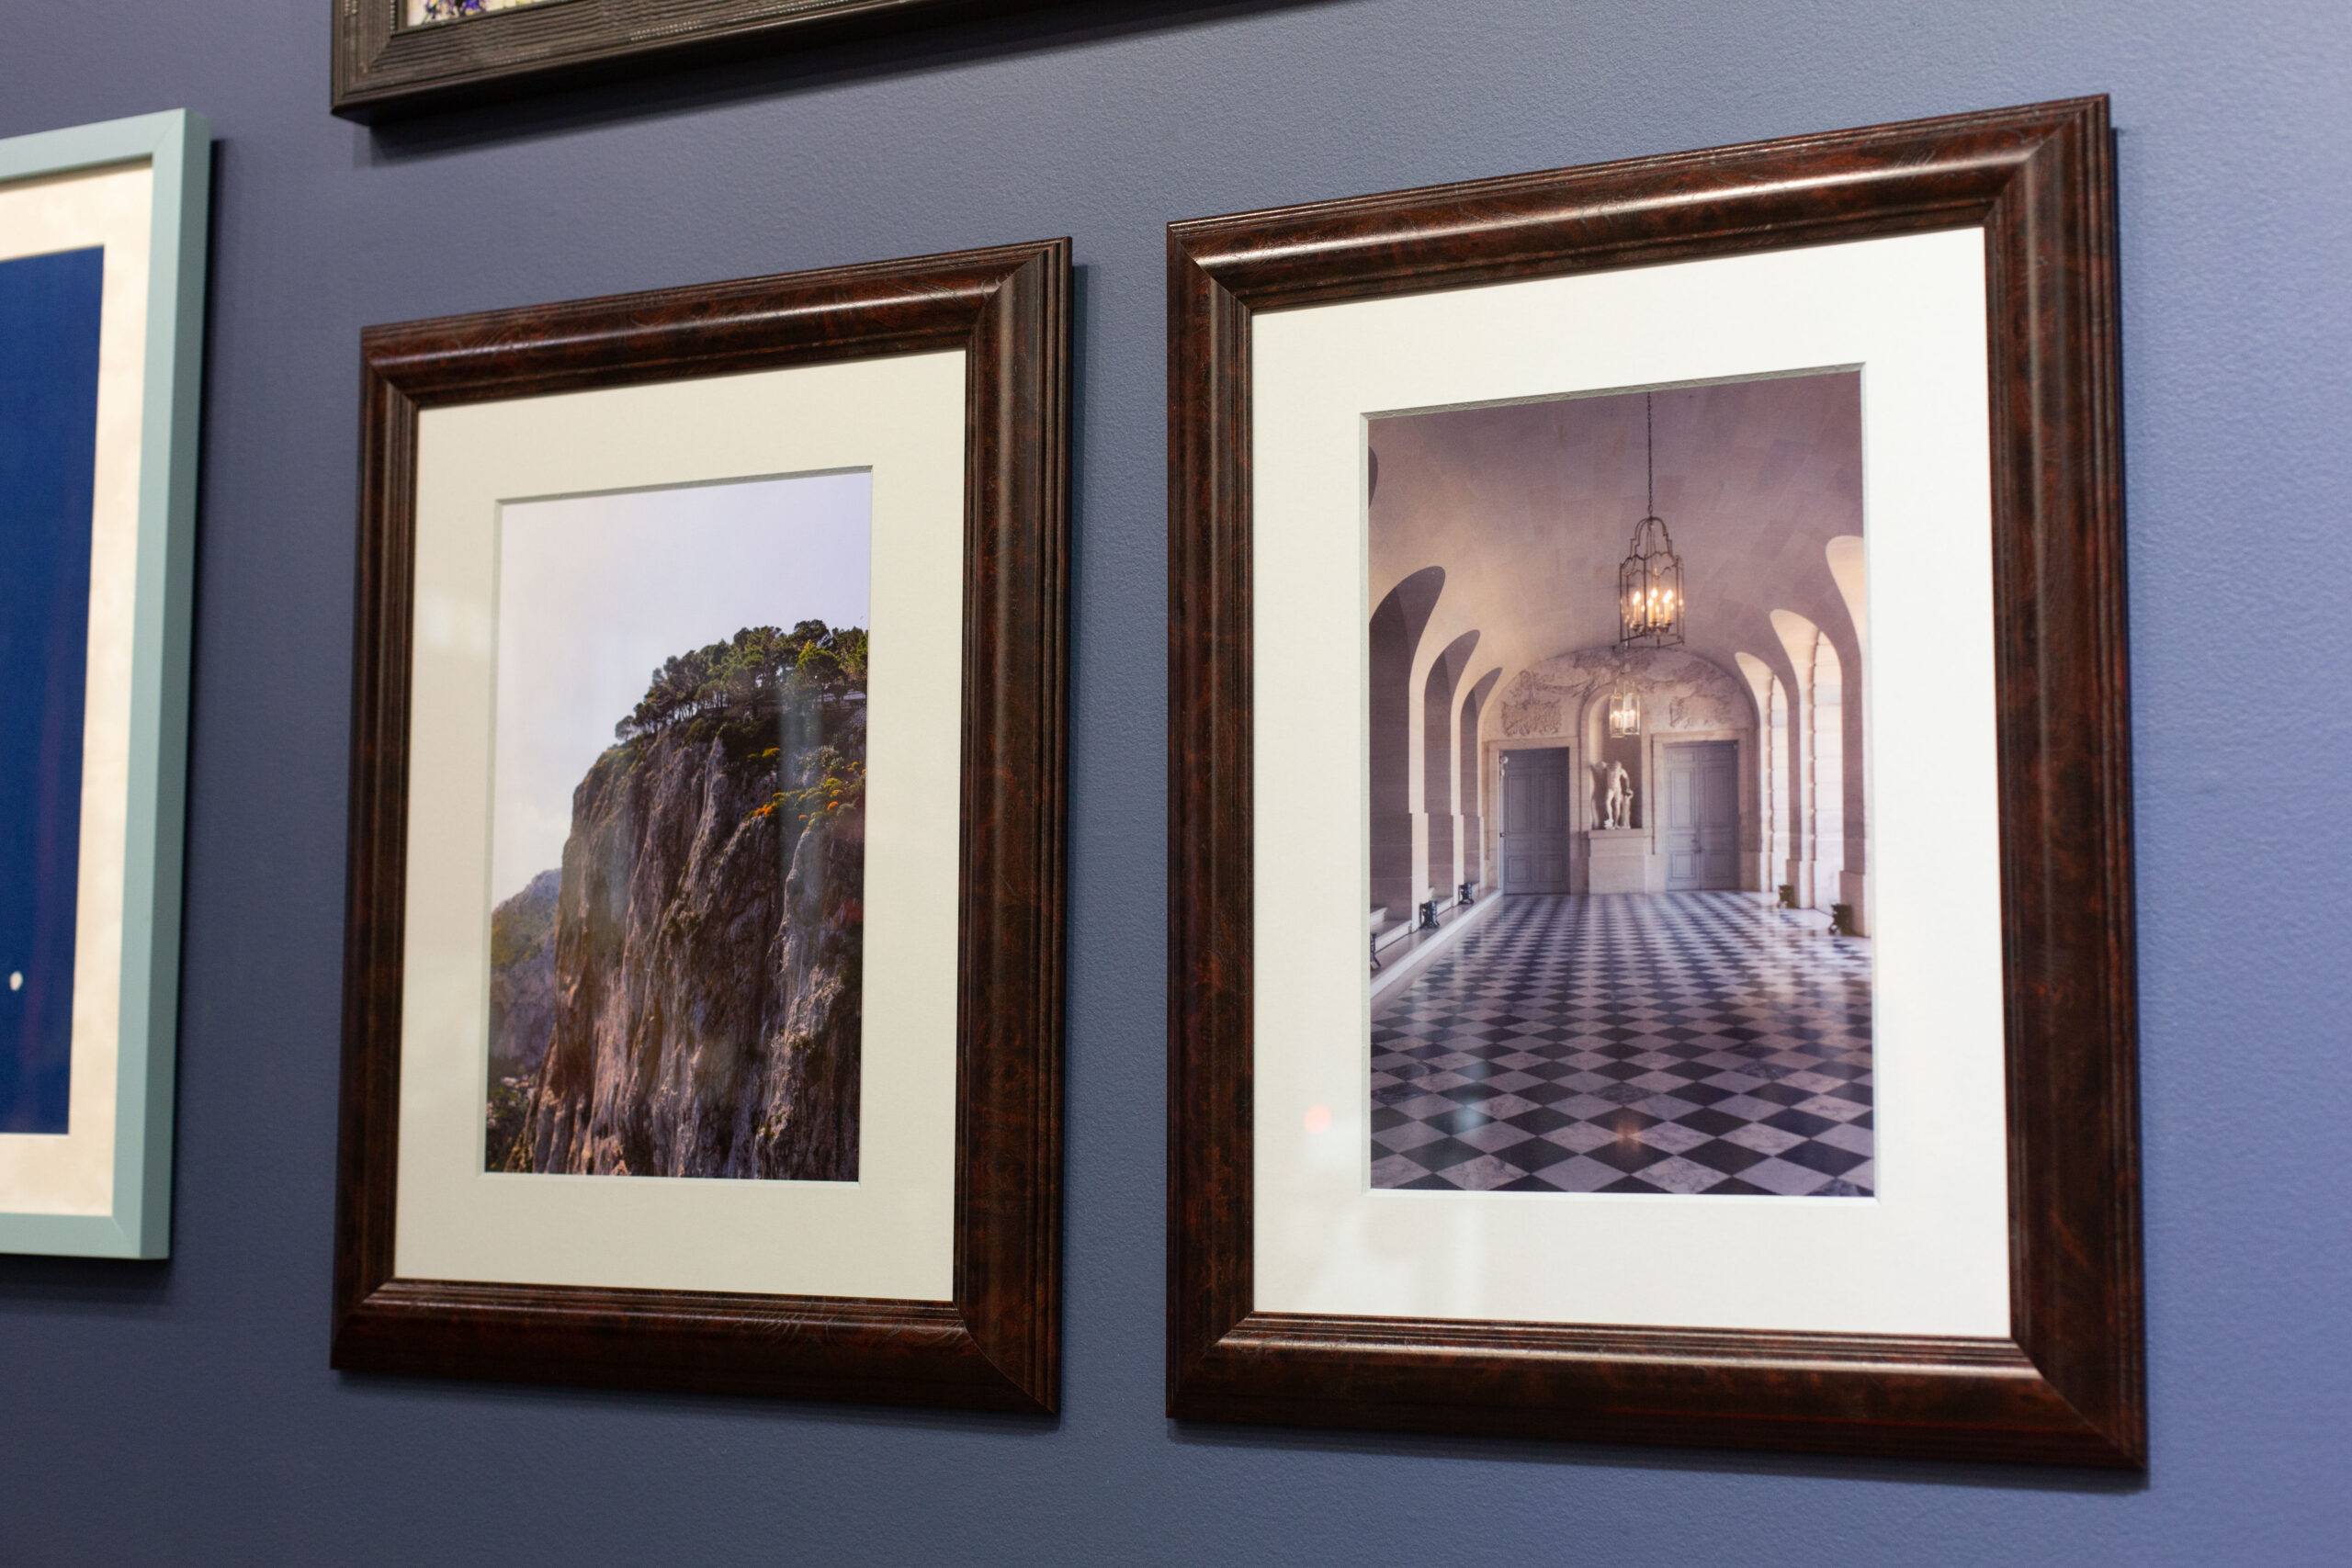 Two photographs framed in rich-colored wood frames hang on the gallery wall. One photograph is a print of a cliffside, while the other is an elegant hallway.